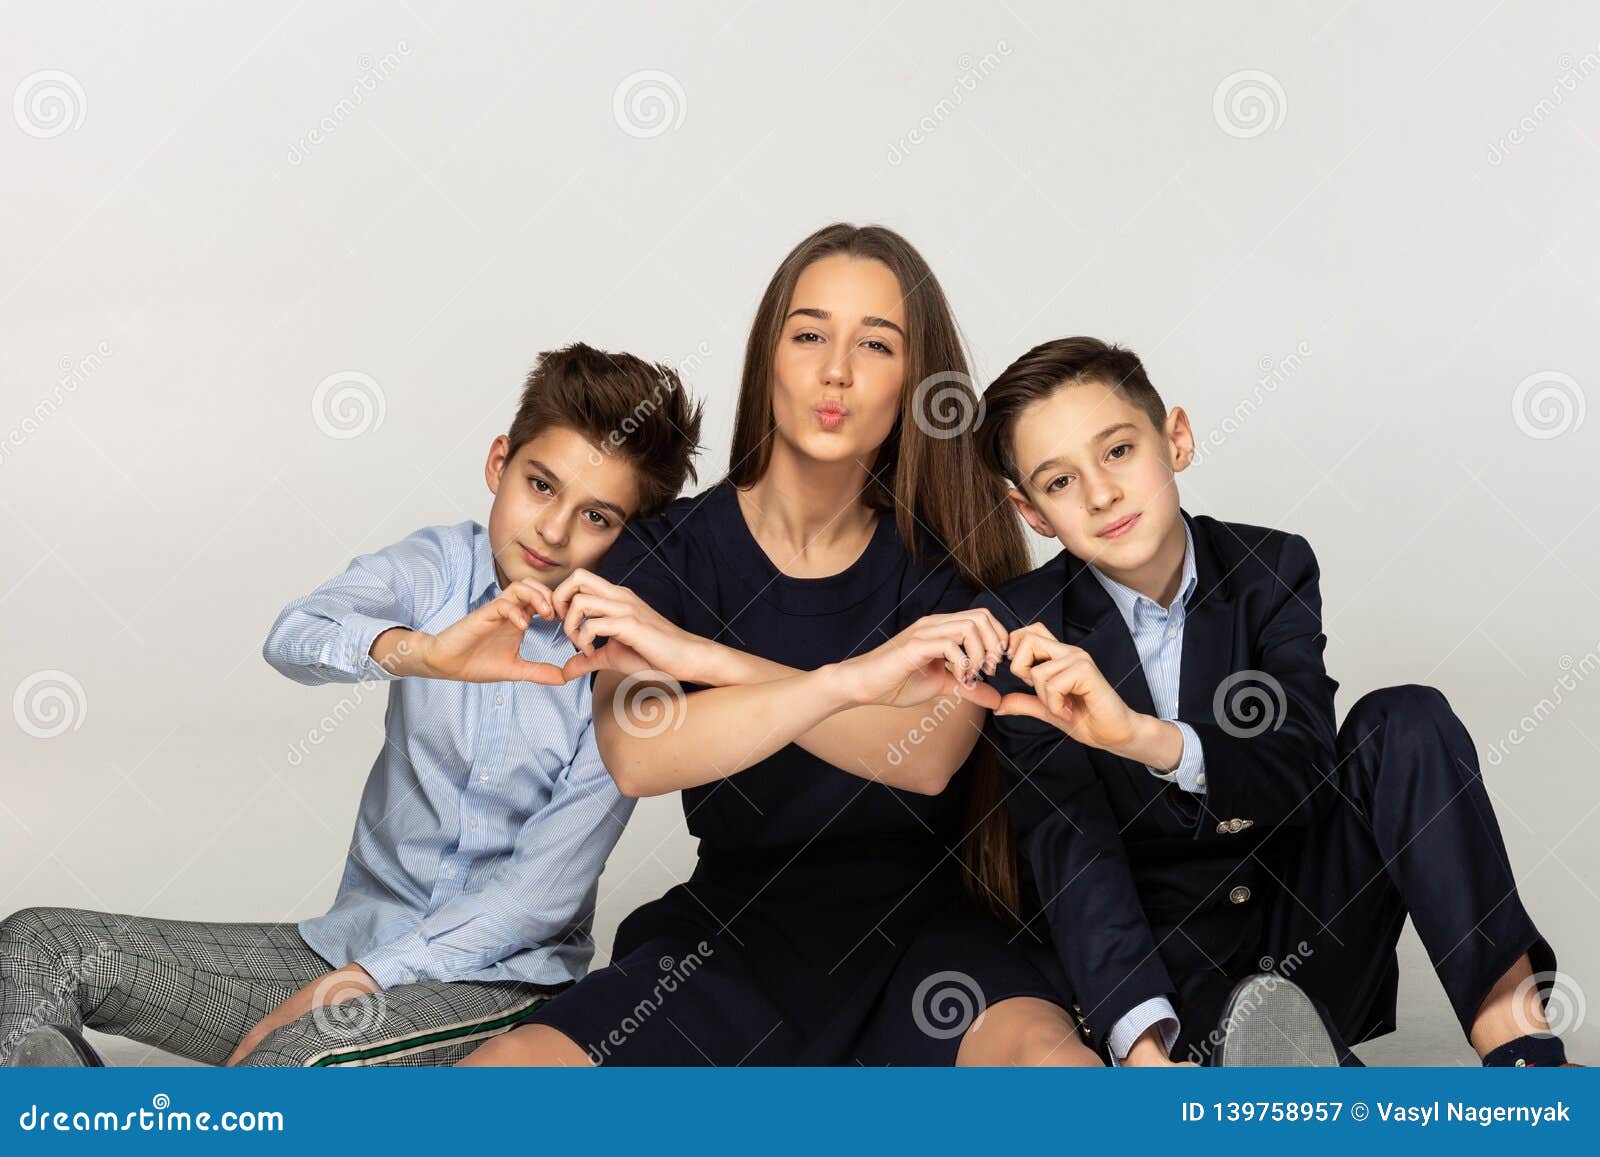 Brothers making love Beautiful Sister Sitting On The Ground With Two Younger Brothers Stock Image Image Of Brunette Portrait 139758957